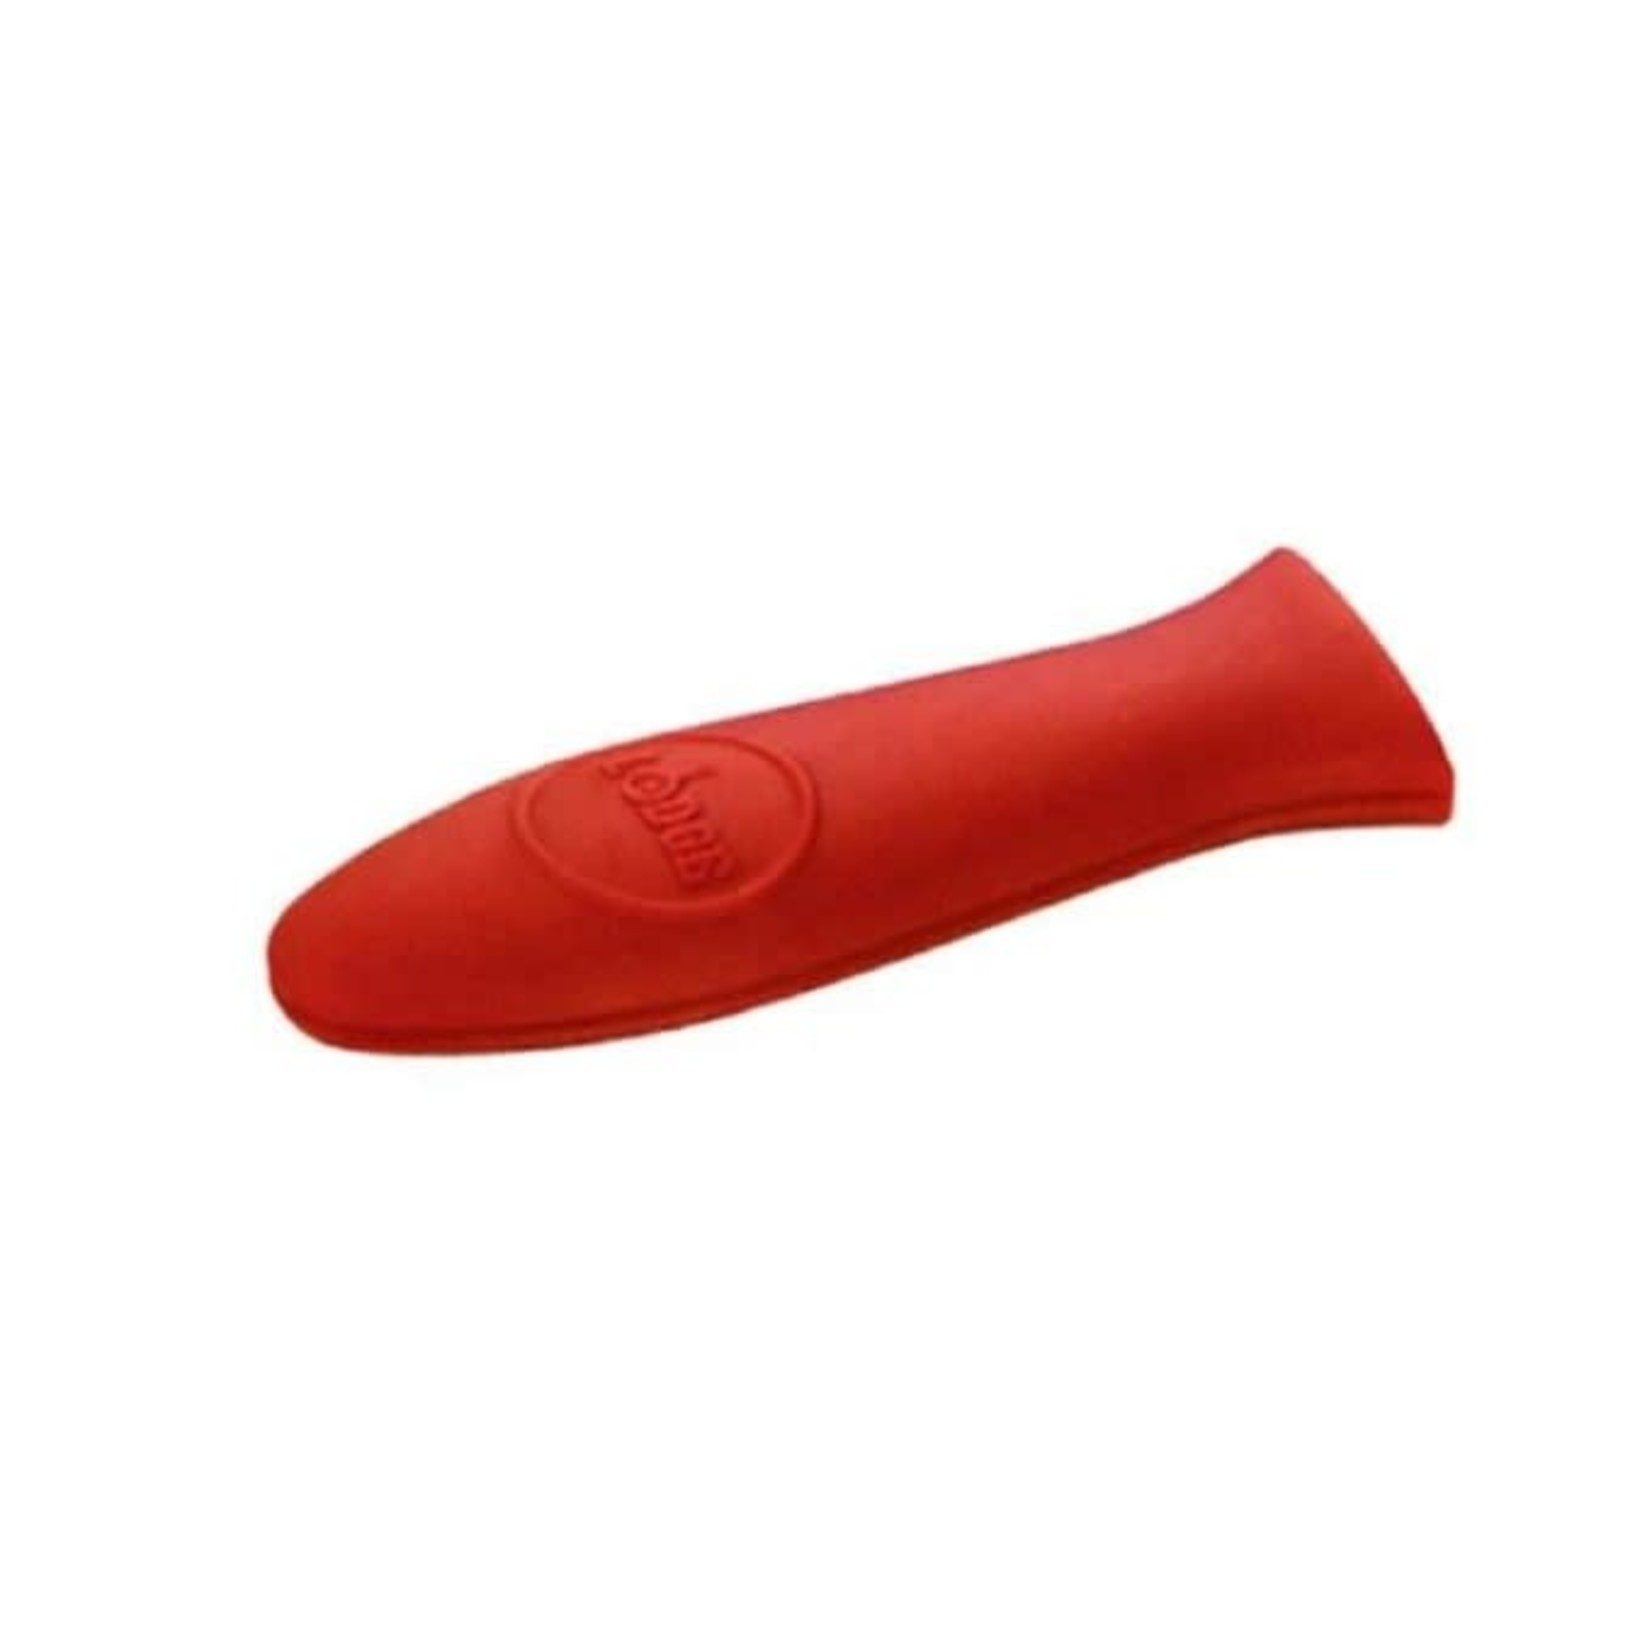 LODGE LODGE Silicone Handle Holder - Red